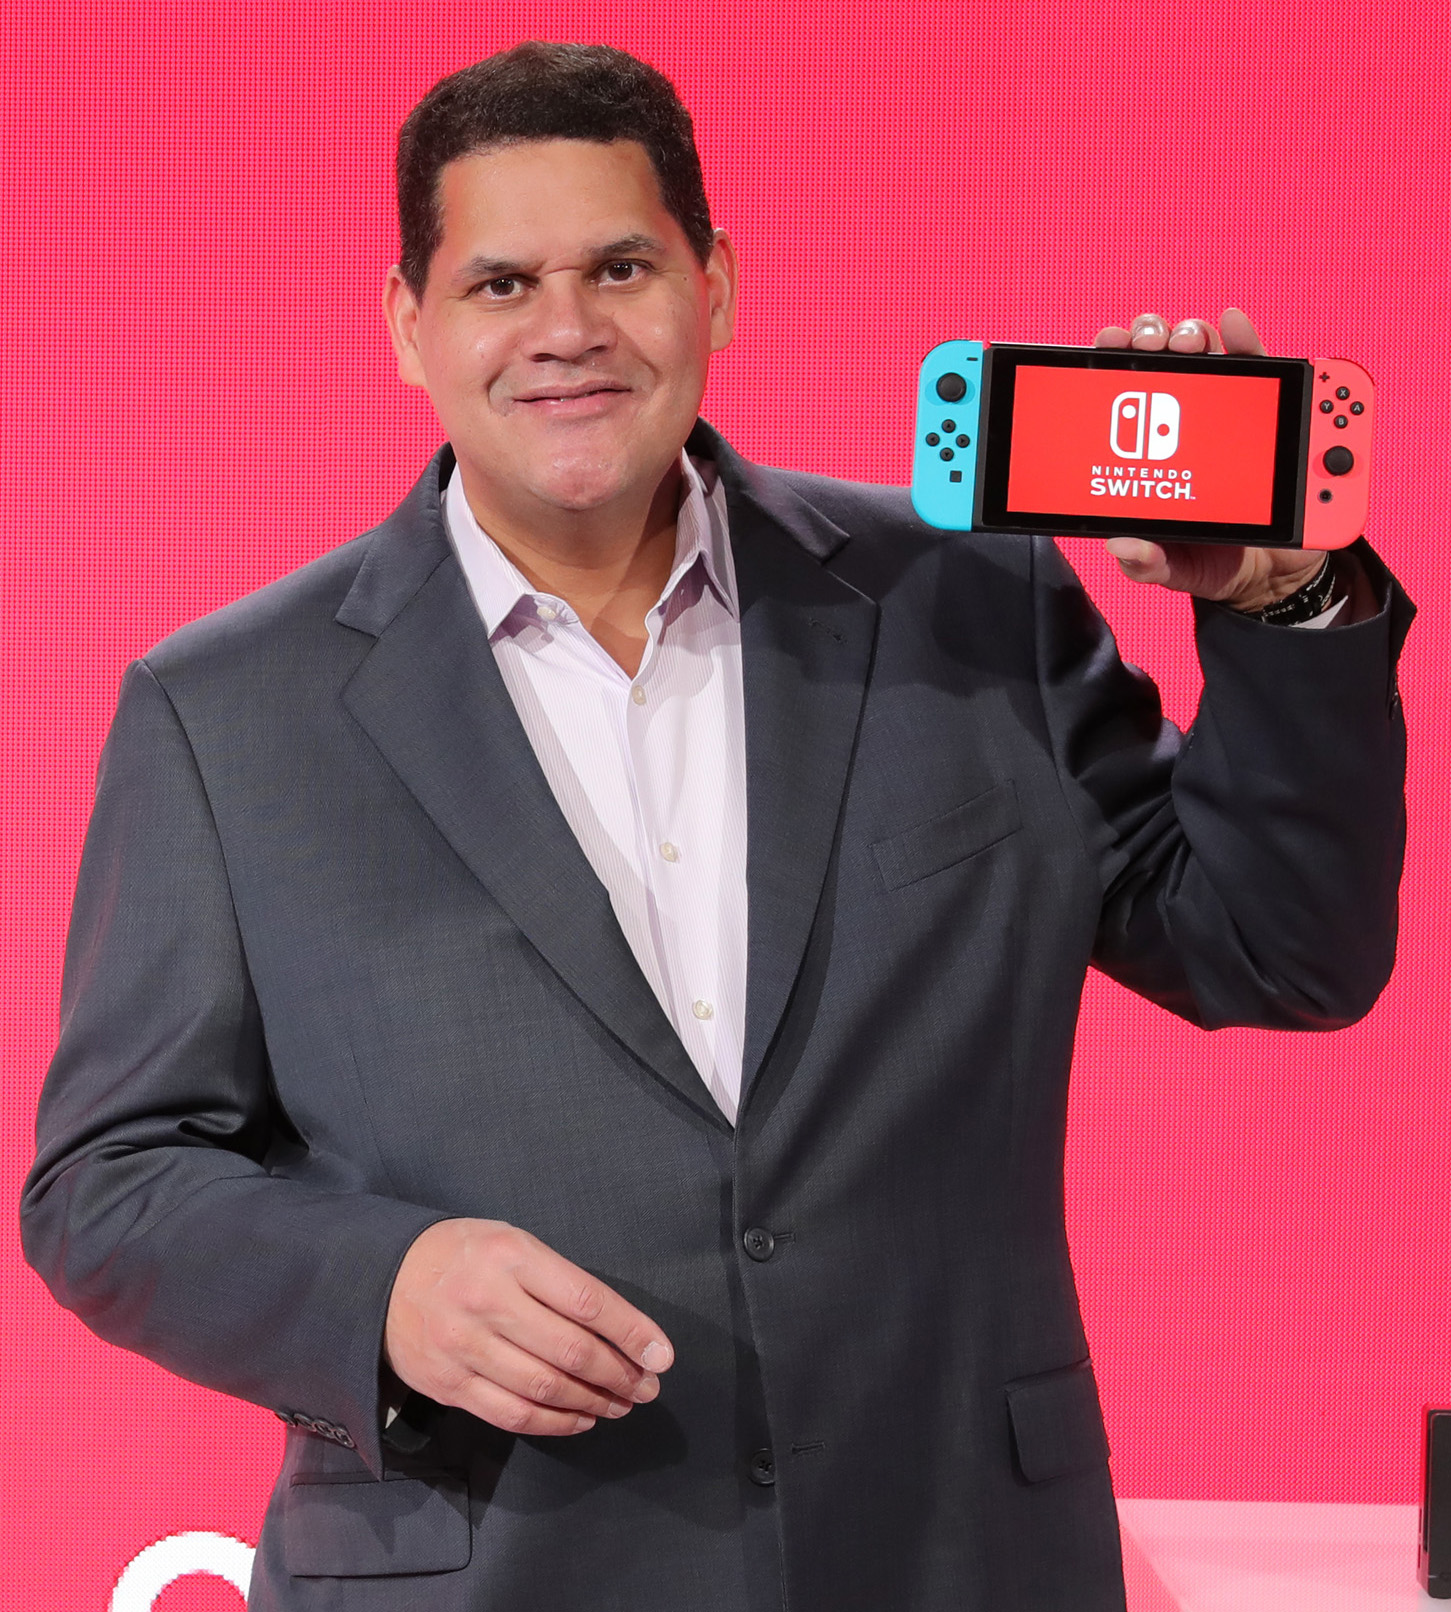 The 61-year old son of father (?) and mother(?) Reggie Fils-Aimé in 2022 photo. Reggie Fils-Aimé earned a  million dollar salary - leaving the net worth at  million in 2022